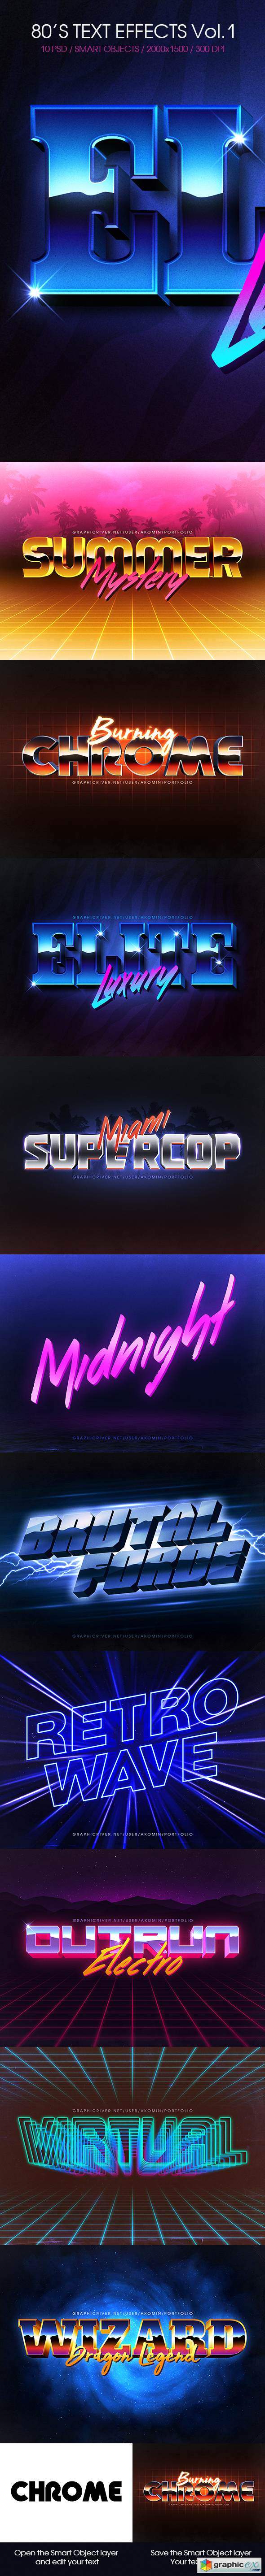 80s Text Effects Vol.1